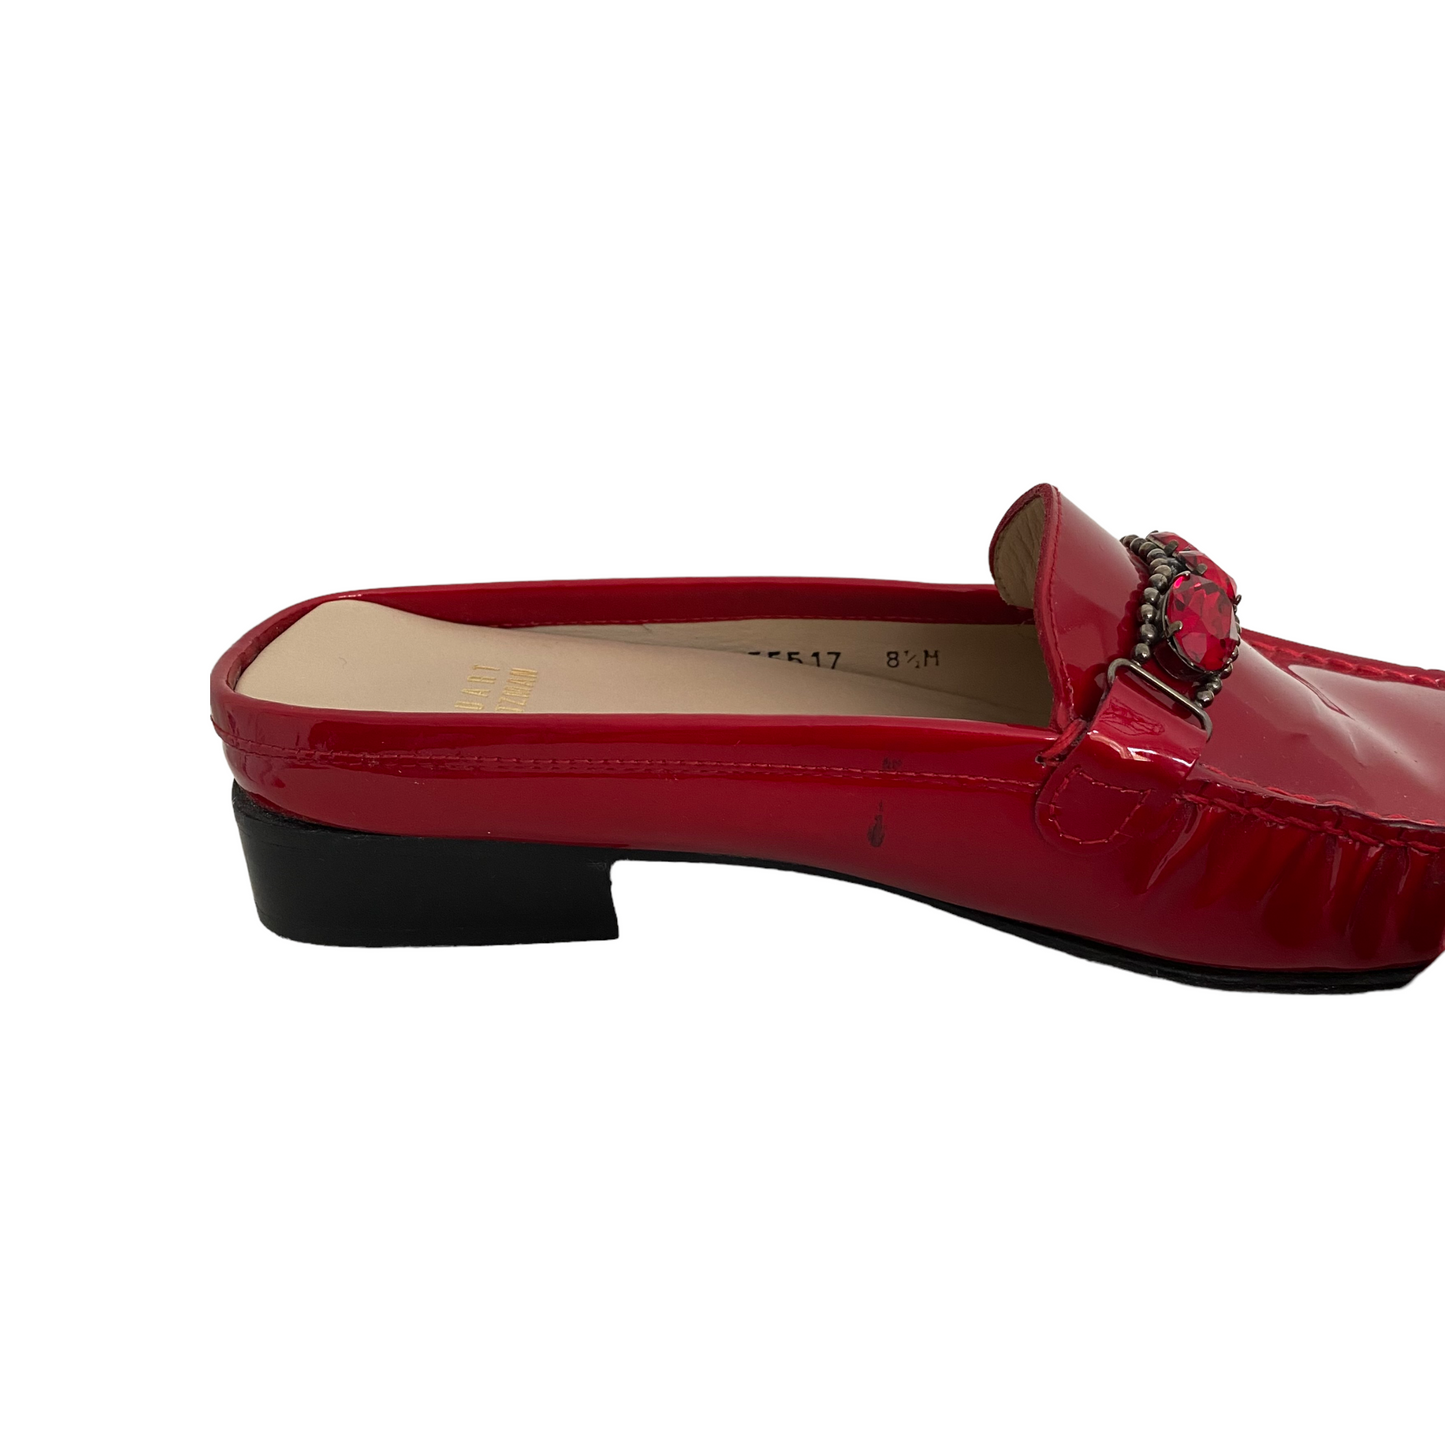 Stuart Weitzman Red Patent Leather Mule Shoes